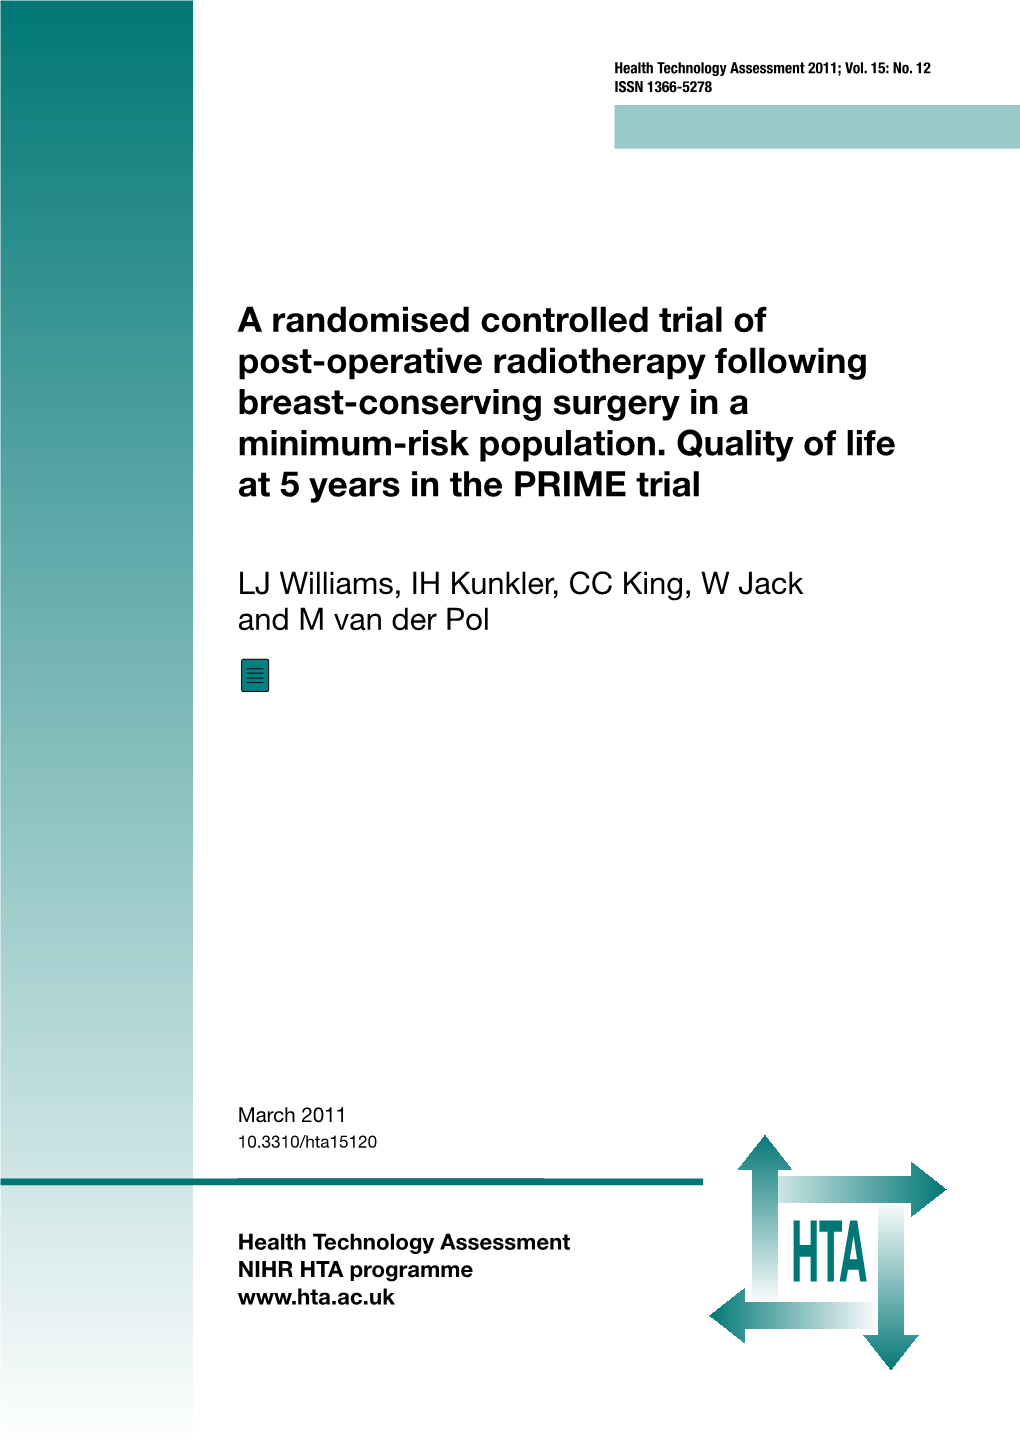 A Randomised Controlled Trial of Post-Operative Radiotherapy Following Breast-Conserving Surgery in a Minimum-Risk Population